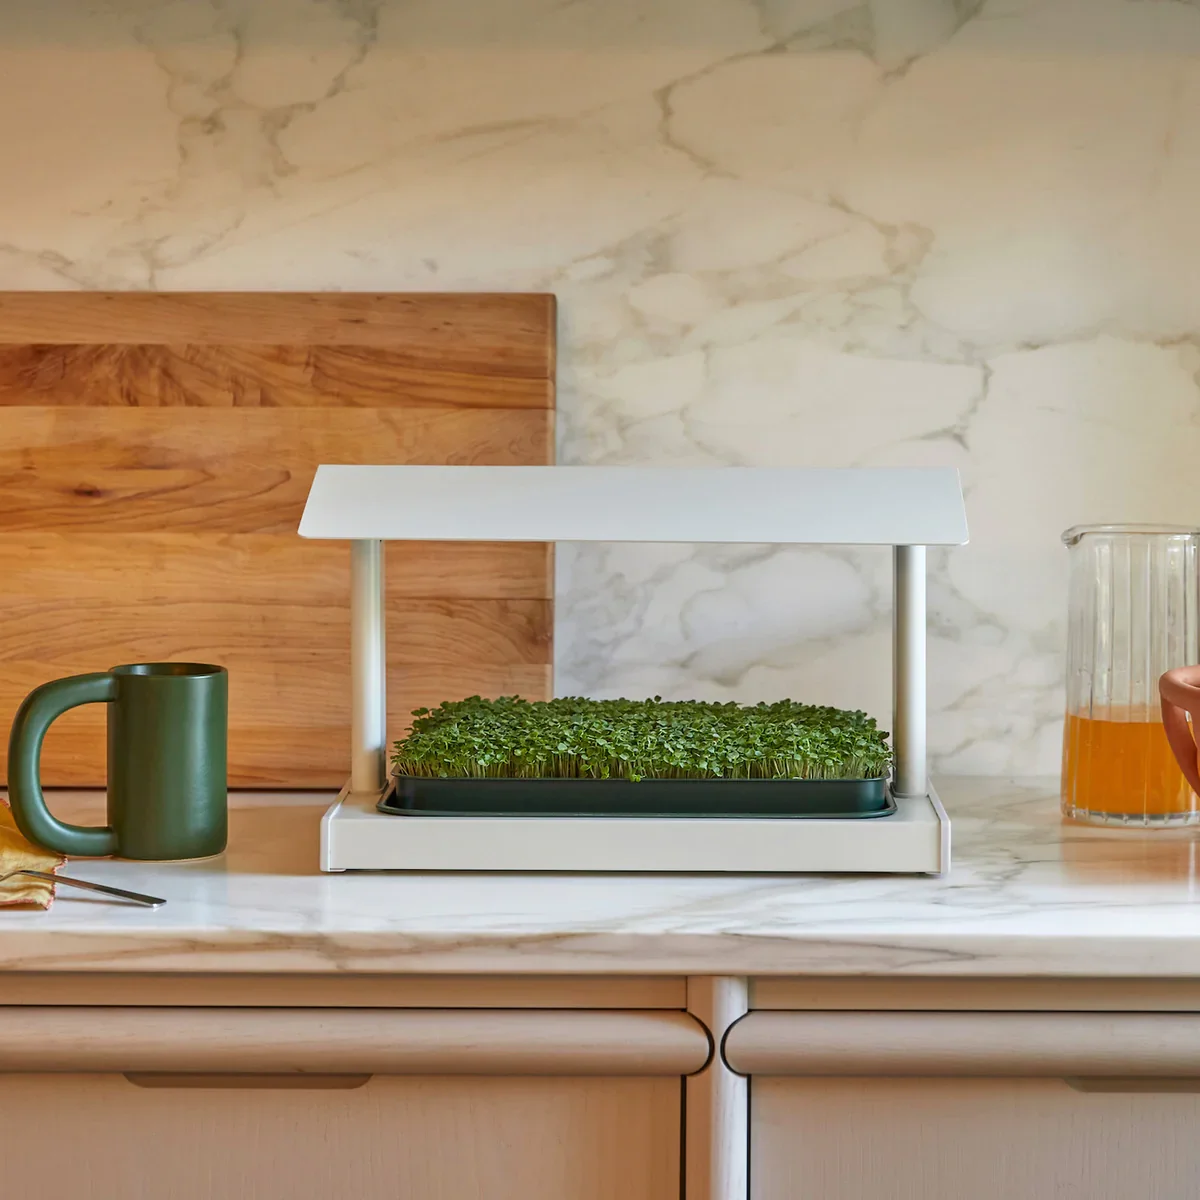 White grow house for microgreens on a kitchen counter in front of a marble backsplash and wooden cutting board.